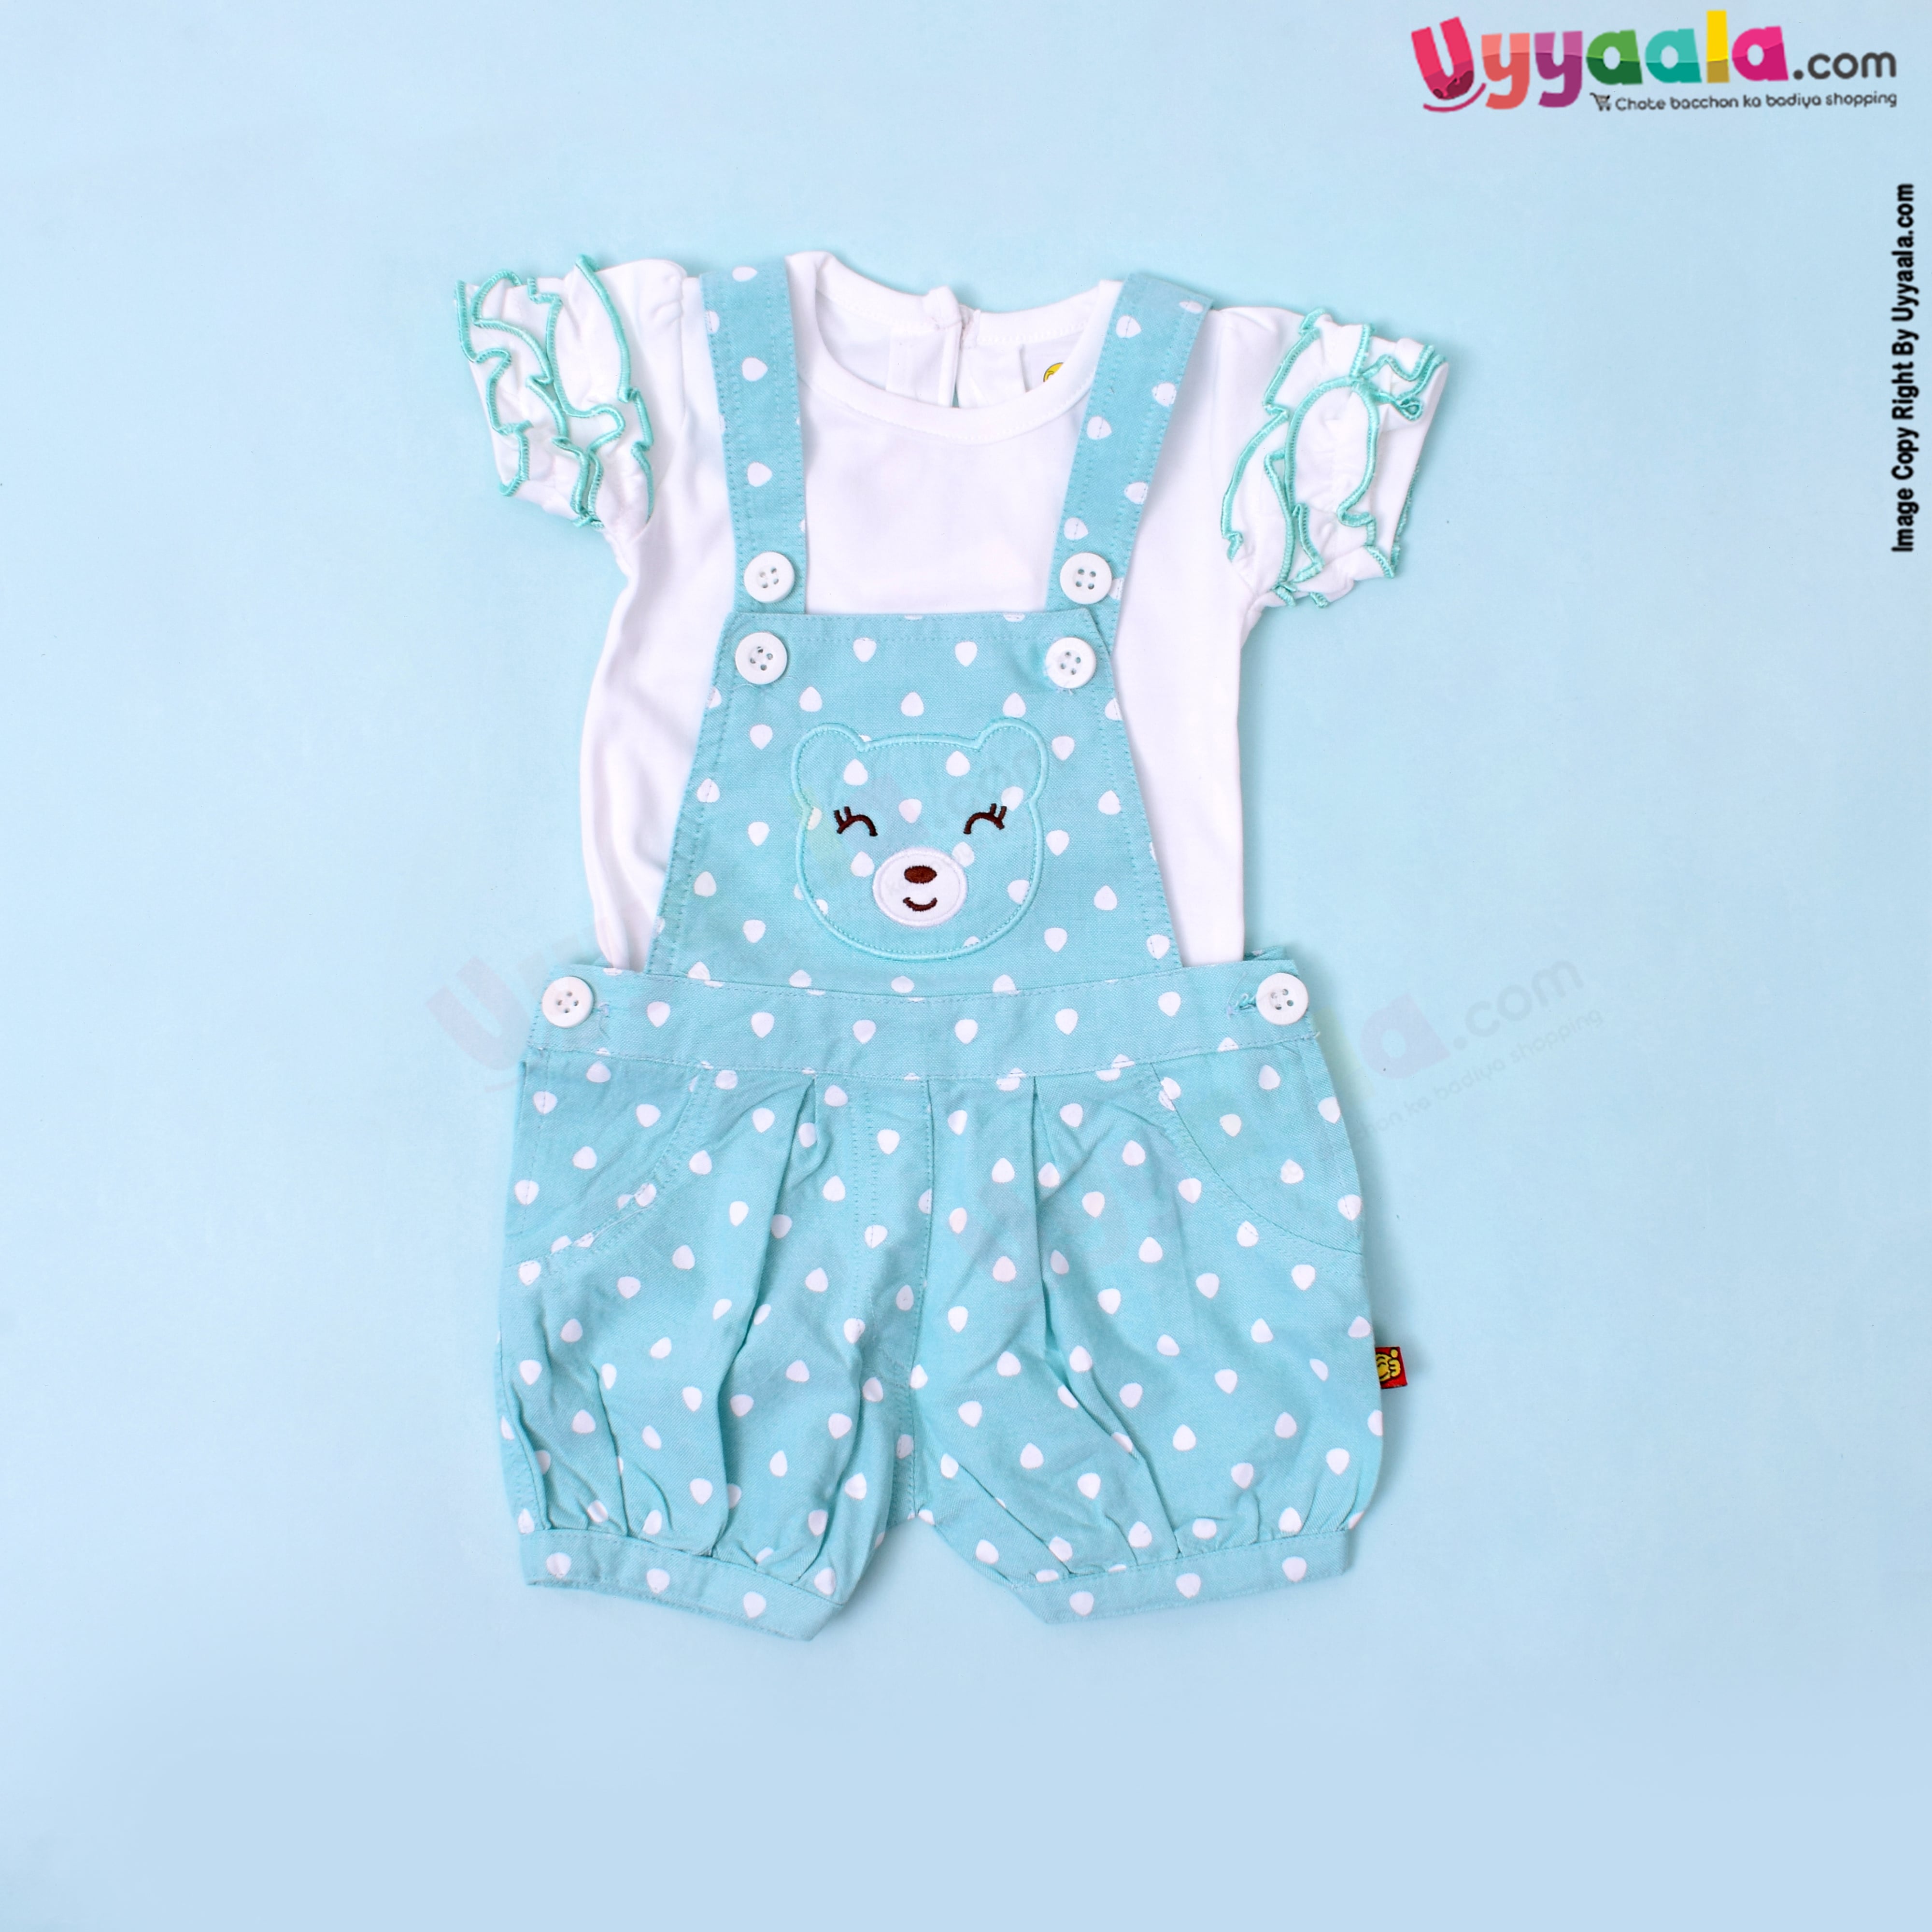 WOW, Branded Short Sleeves Dungaree Front open Button Model Soft Hosiery Cotton, Bear Patch Dotted Print - White & Light Green